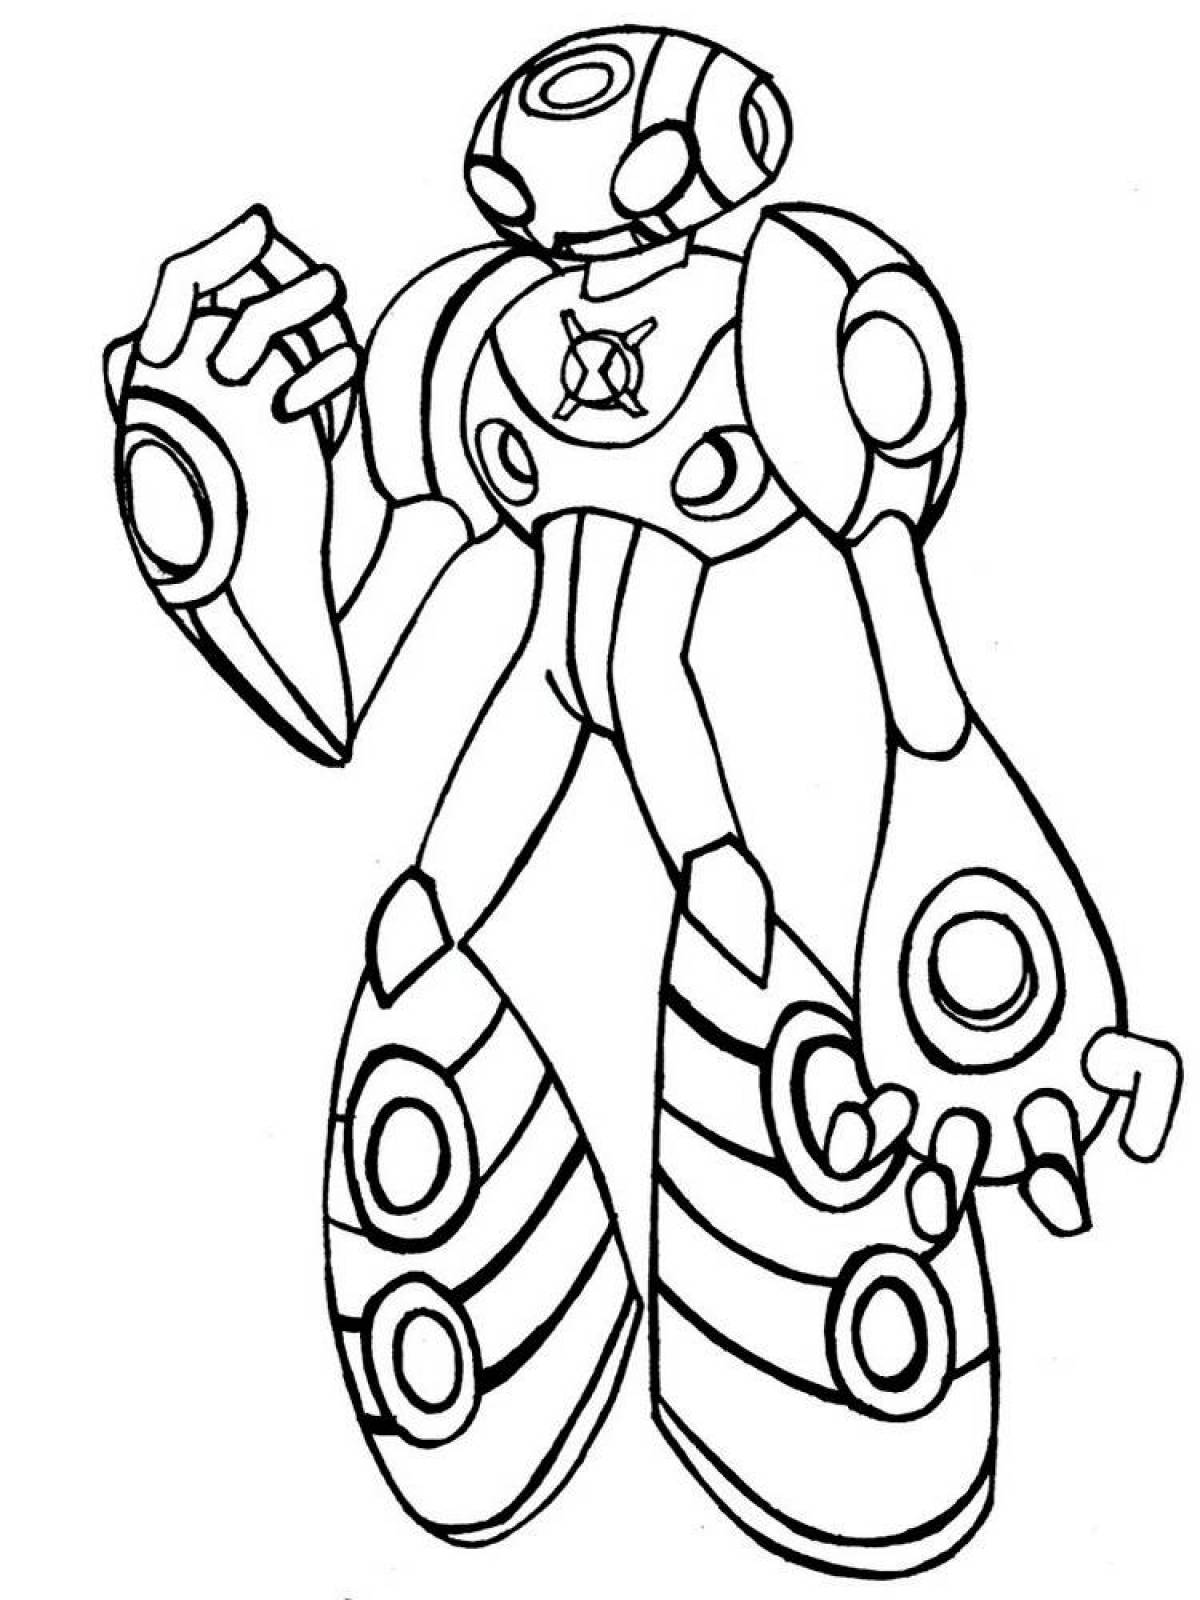 Charming ben 10 coloring page